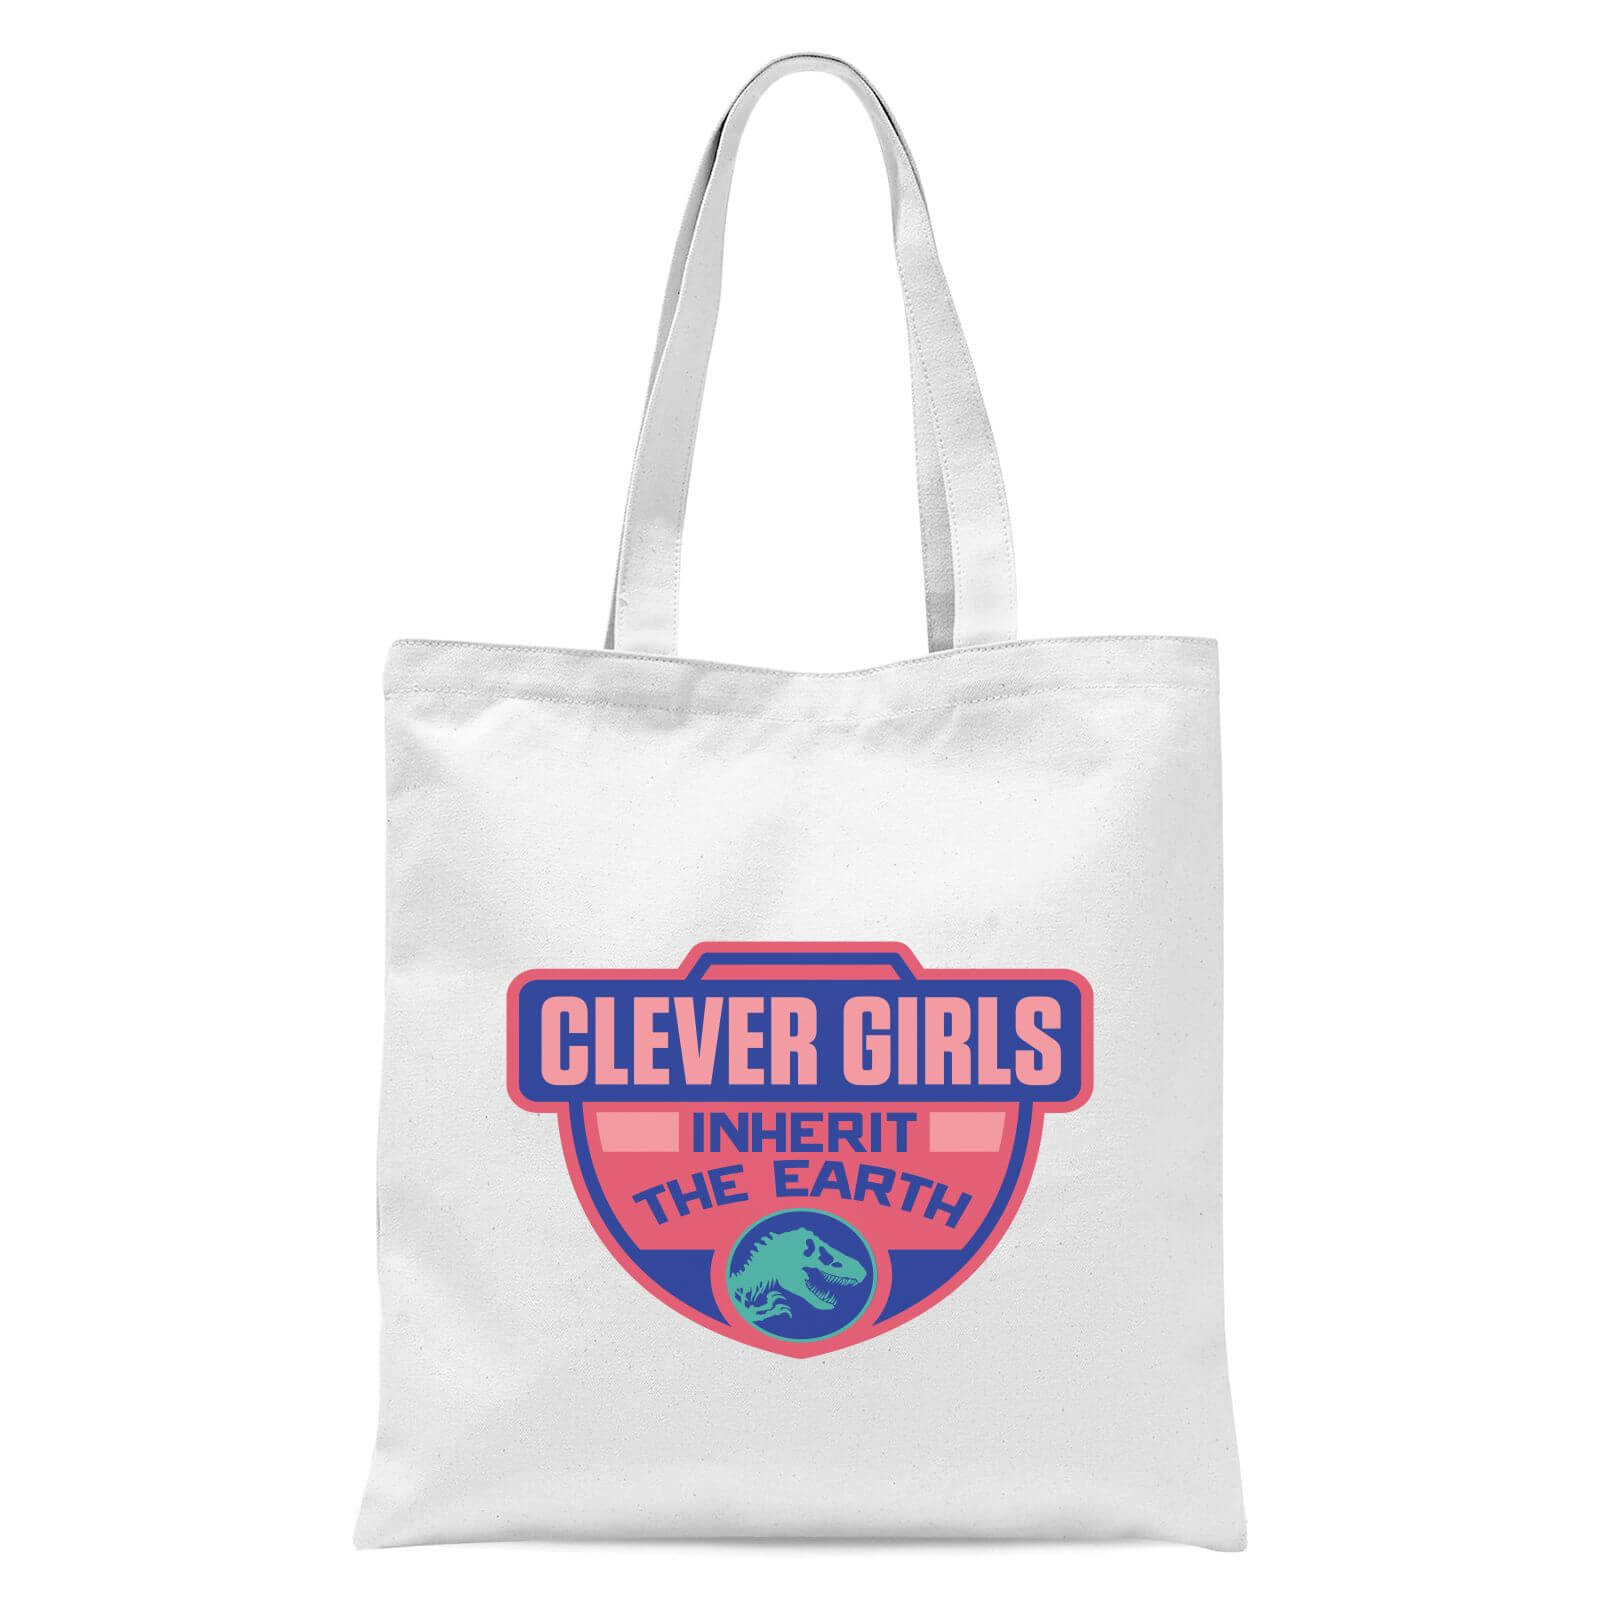 Jurassic Park Clever Girls Inherit The Earth Tote Bag - White